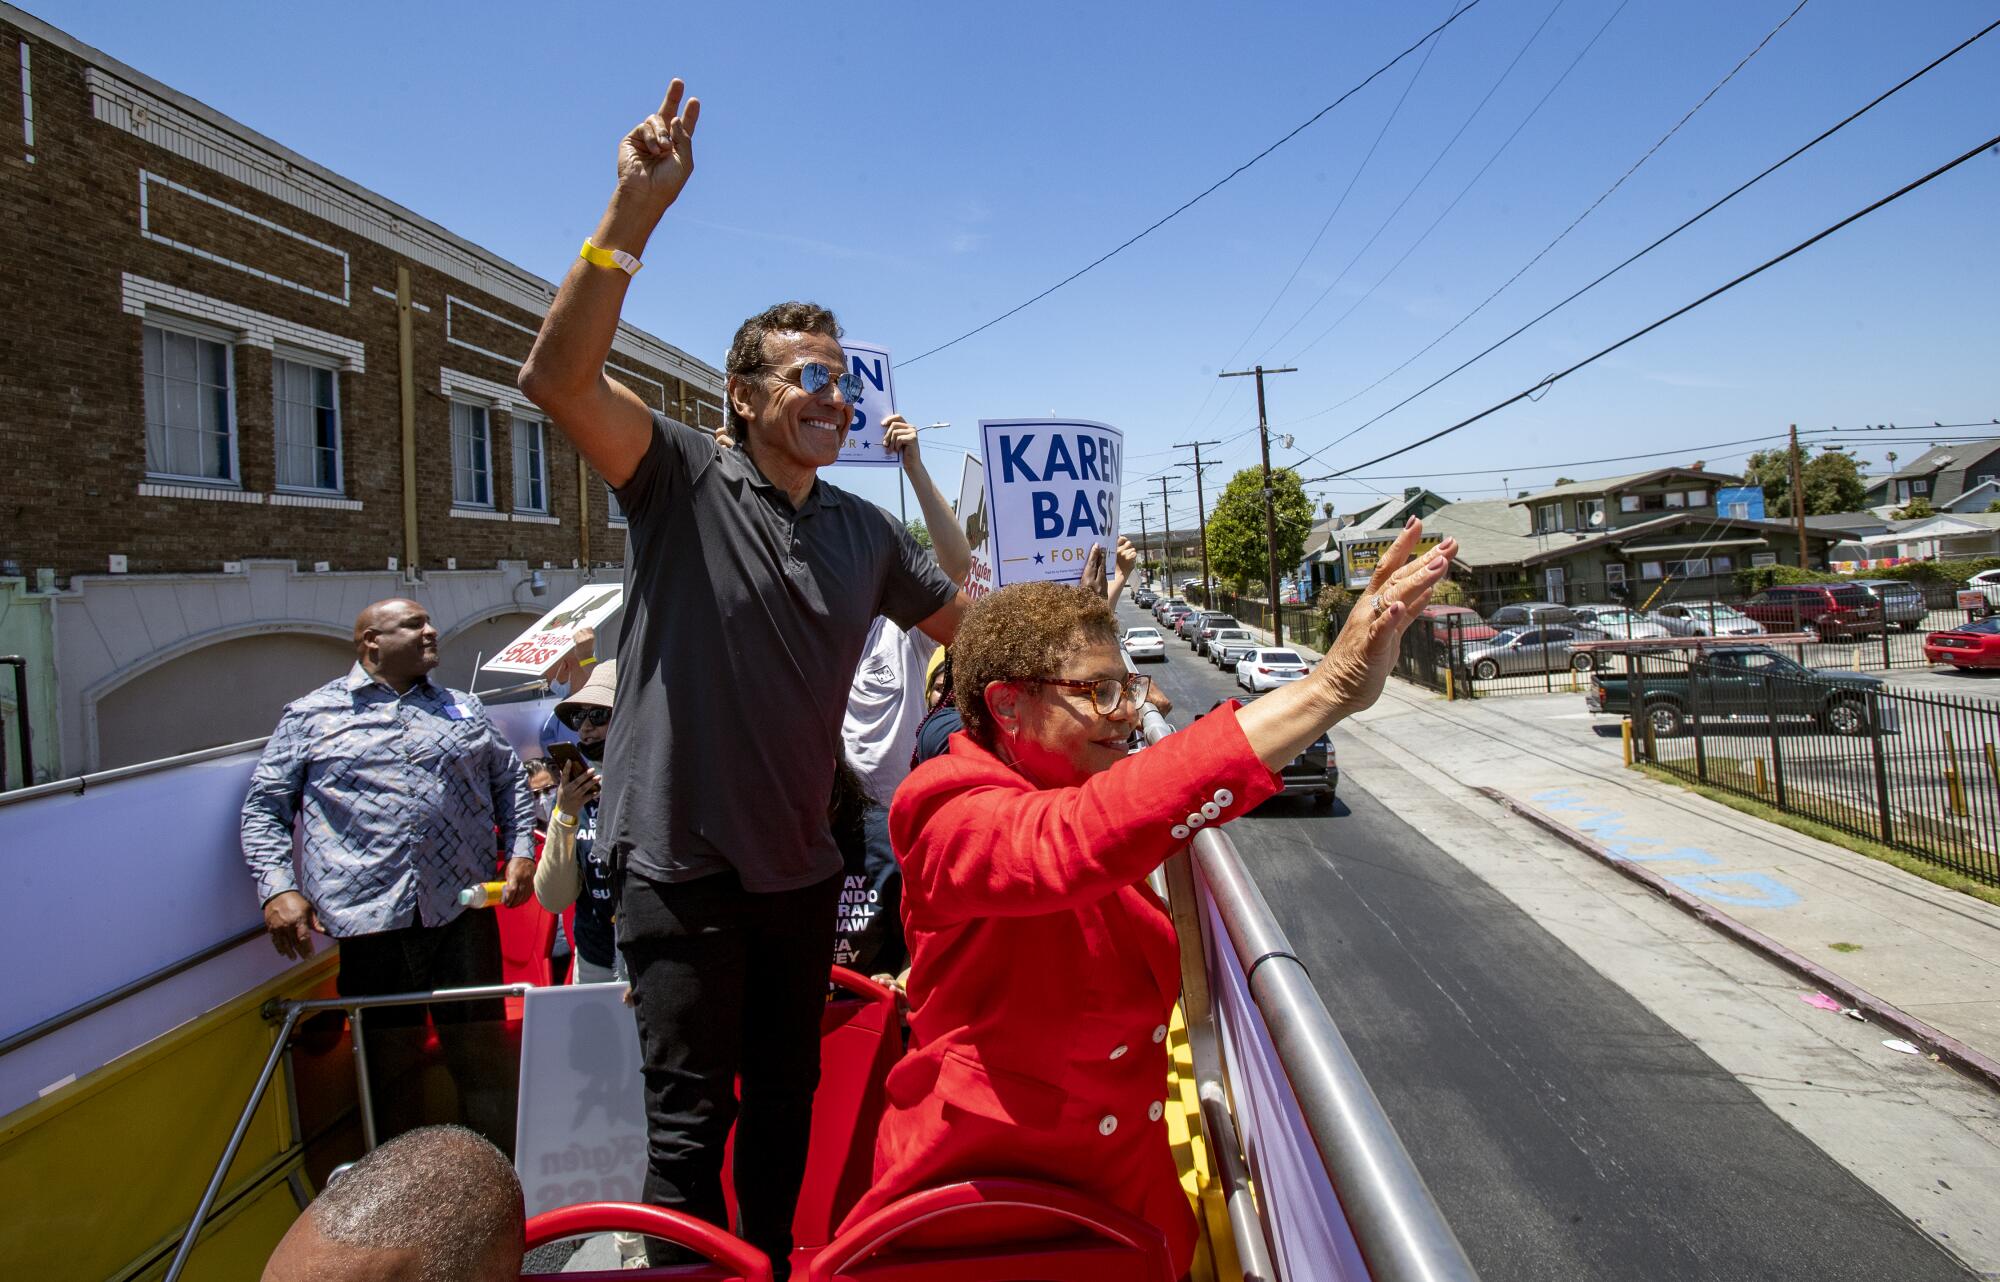 Rep. Karen Bass and former Mayor Antonio Villaraigosa wave to onlookers from a double-decker bus during a campaign event.